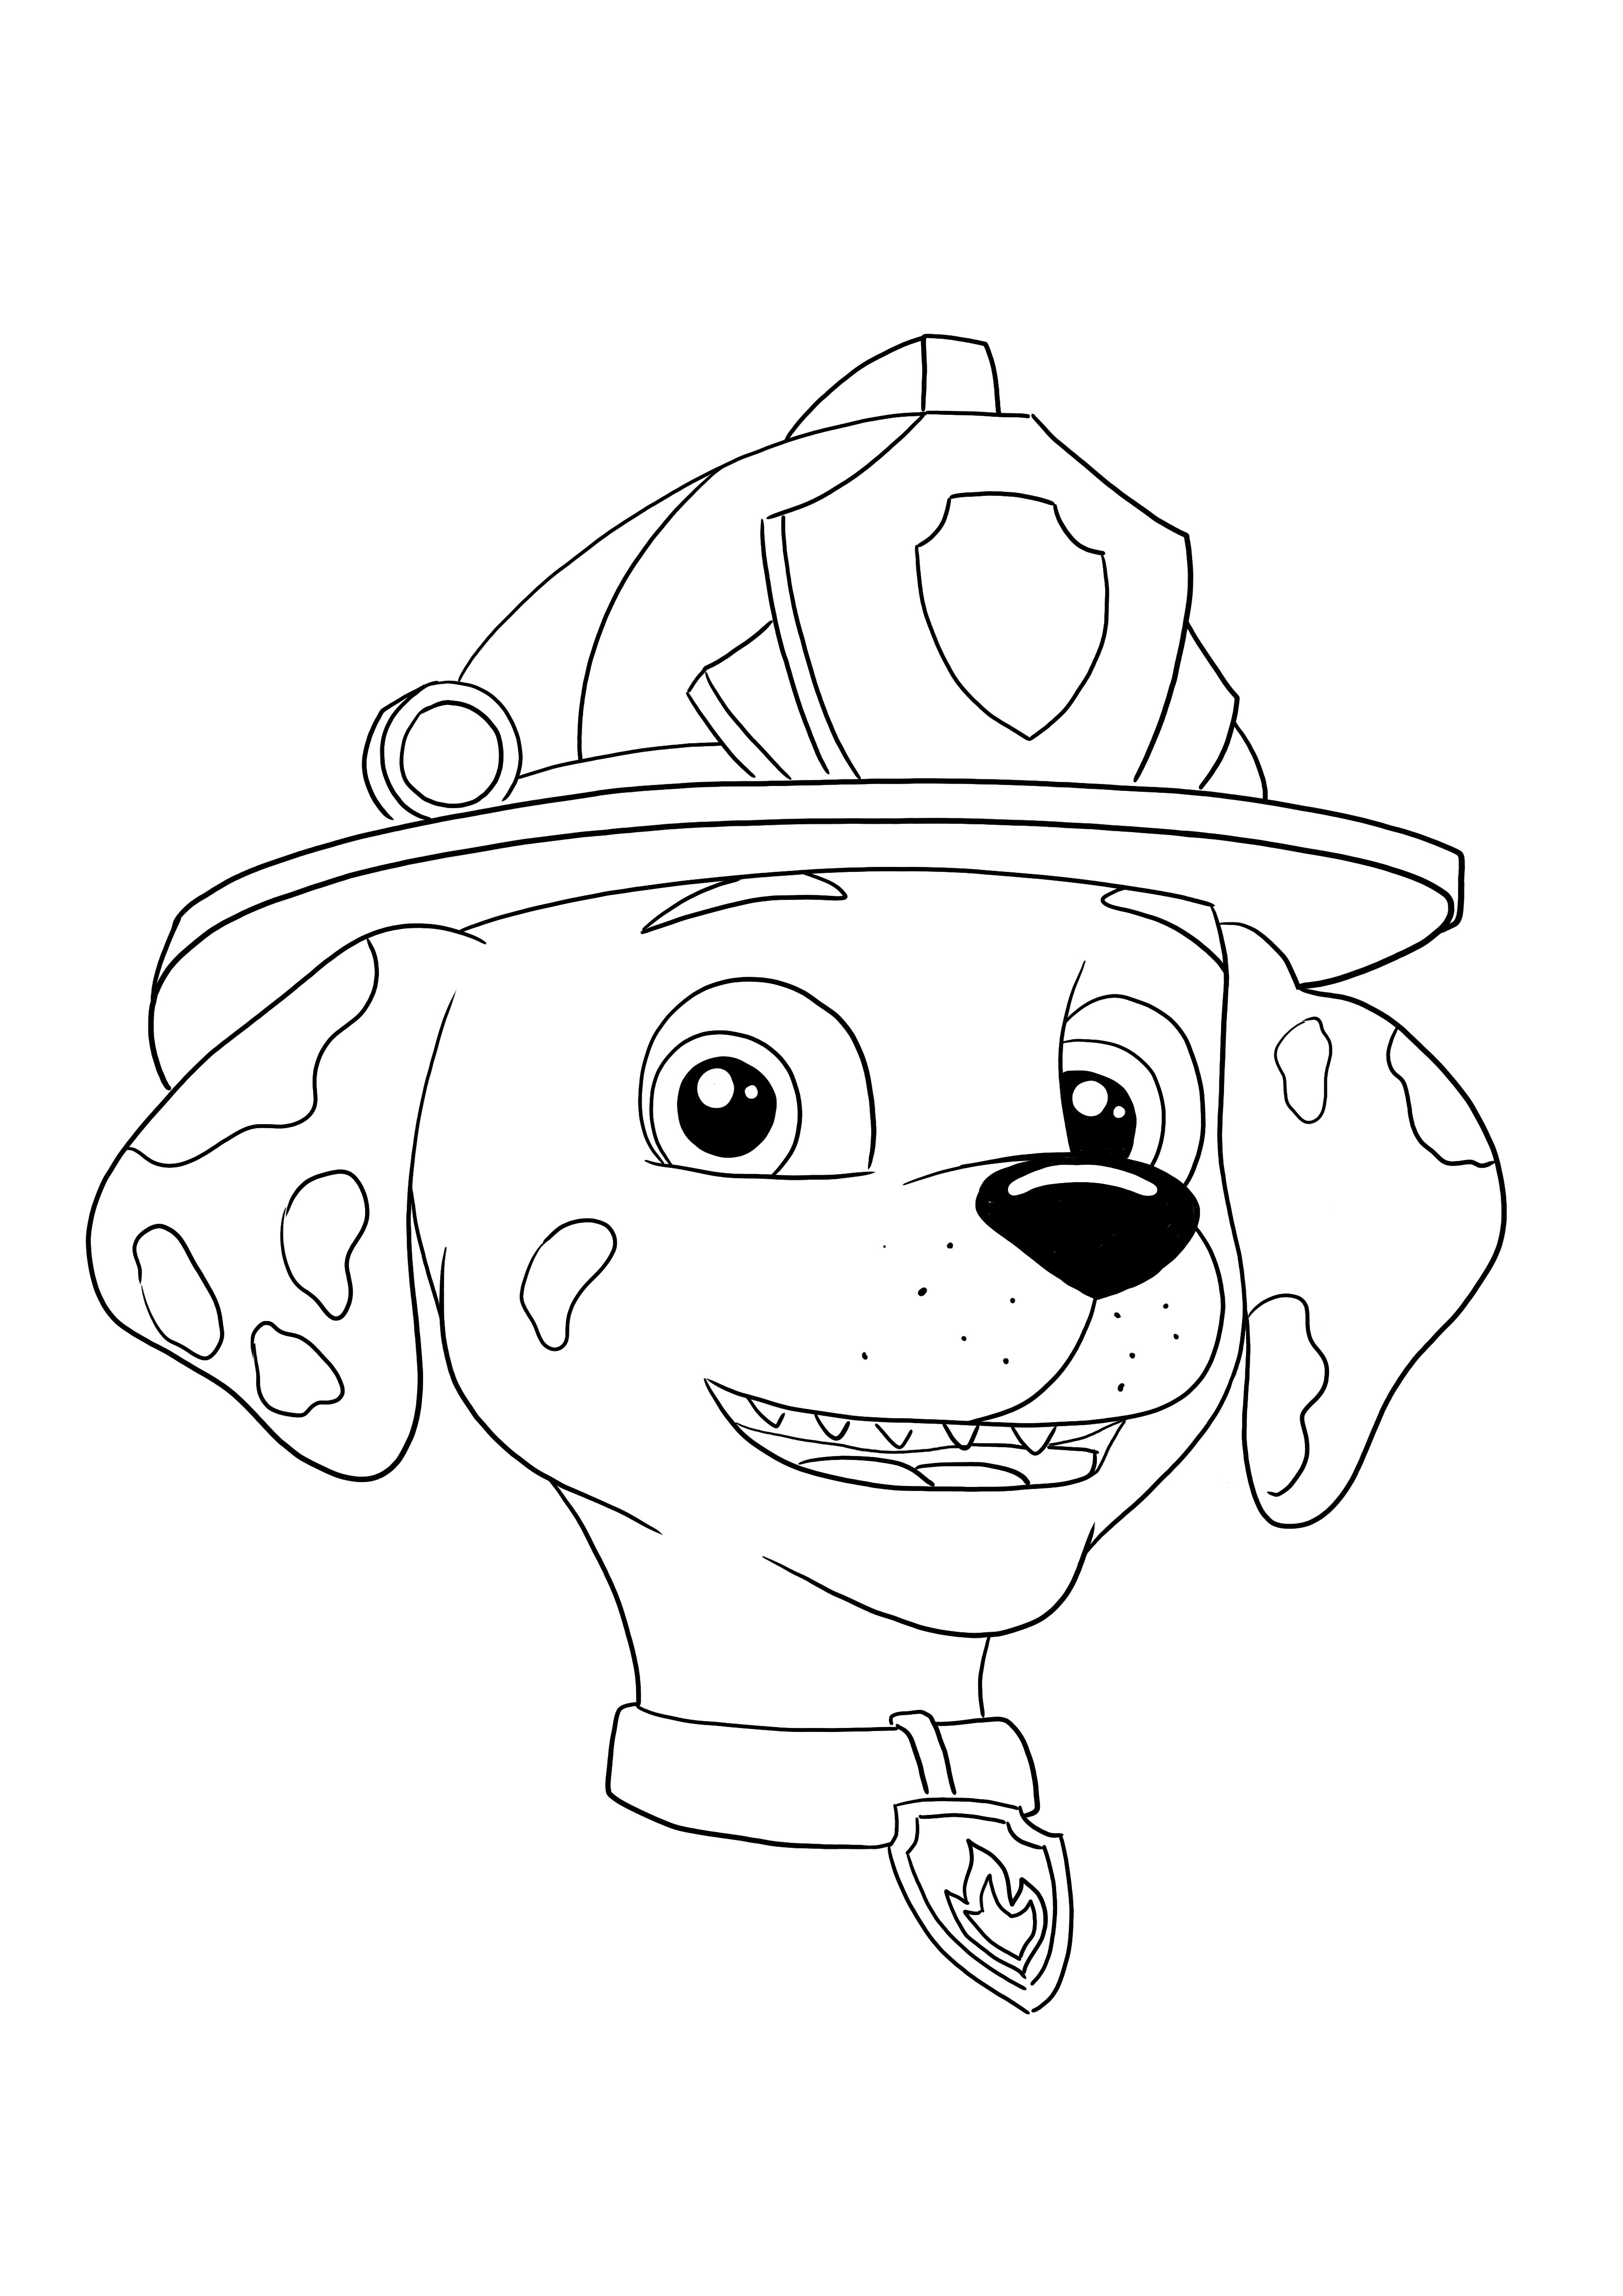 Marshall for Paw patrol free downloadable or printable for kids to color